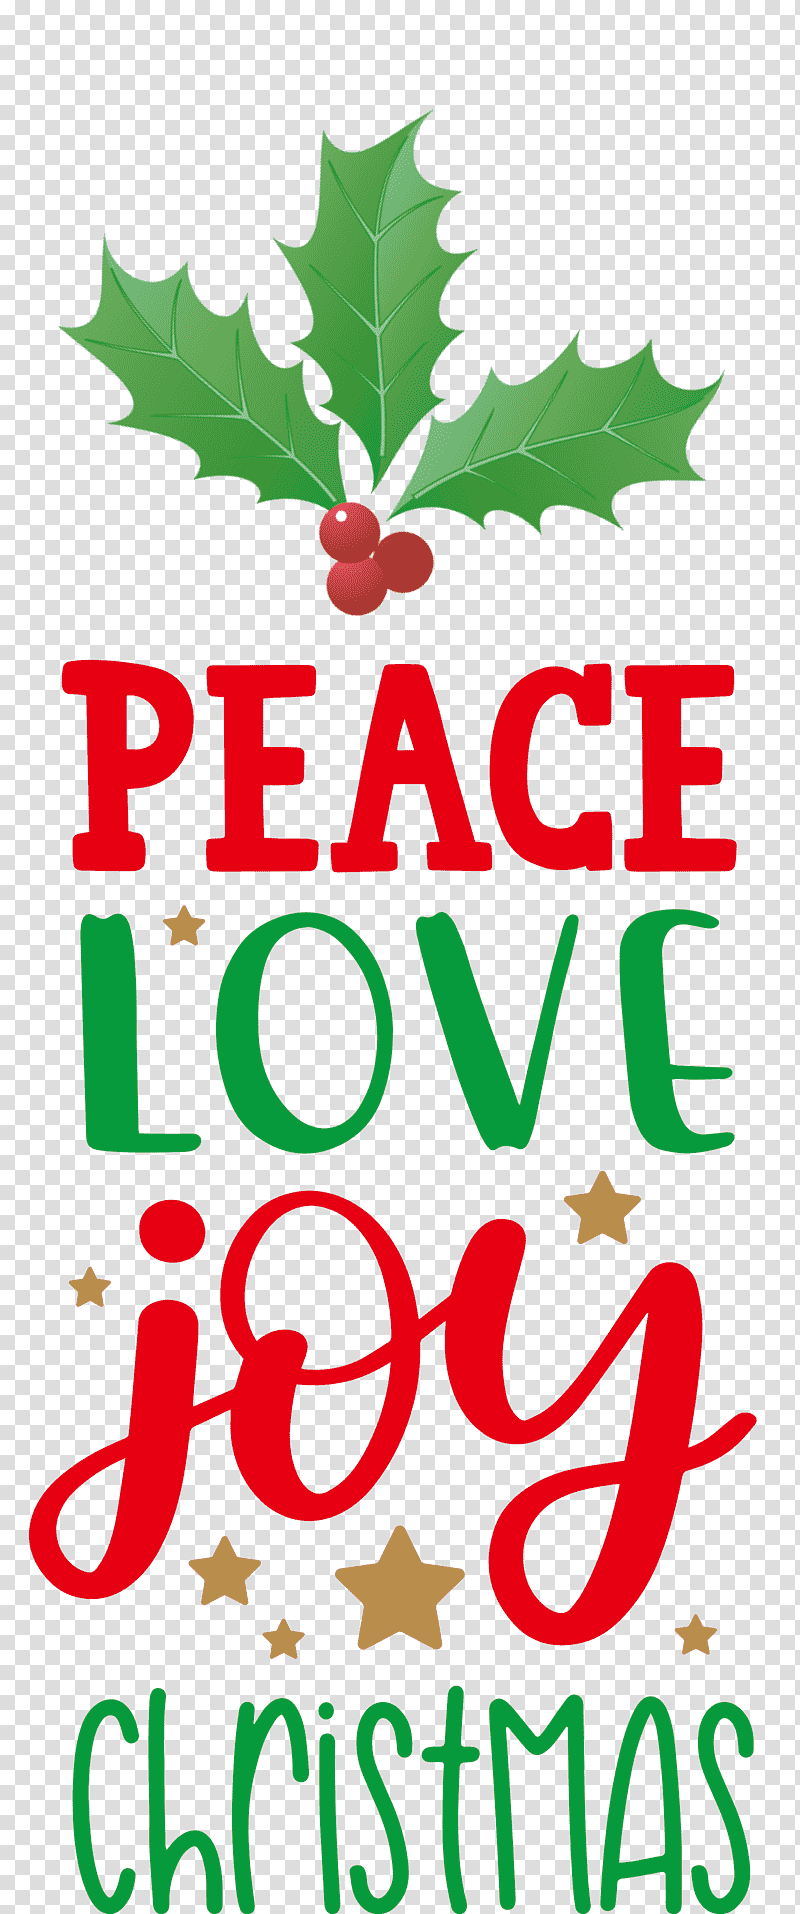 Peace Love Joy, Christmas , Christmas Tree, Leaf, Floral Design, Christmas Day, Line transparent background PNG clipart